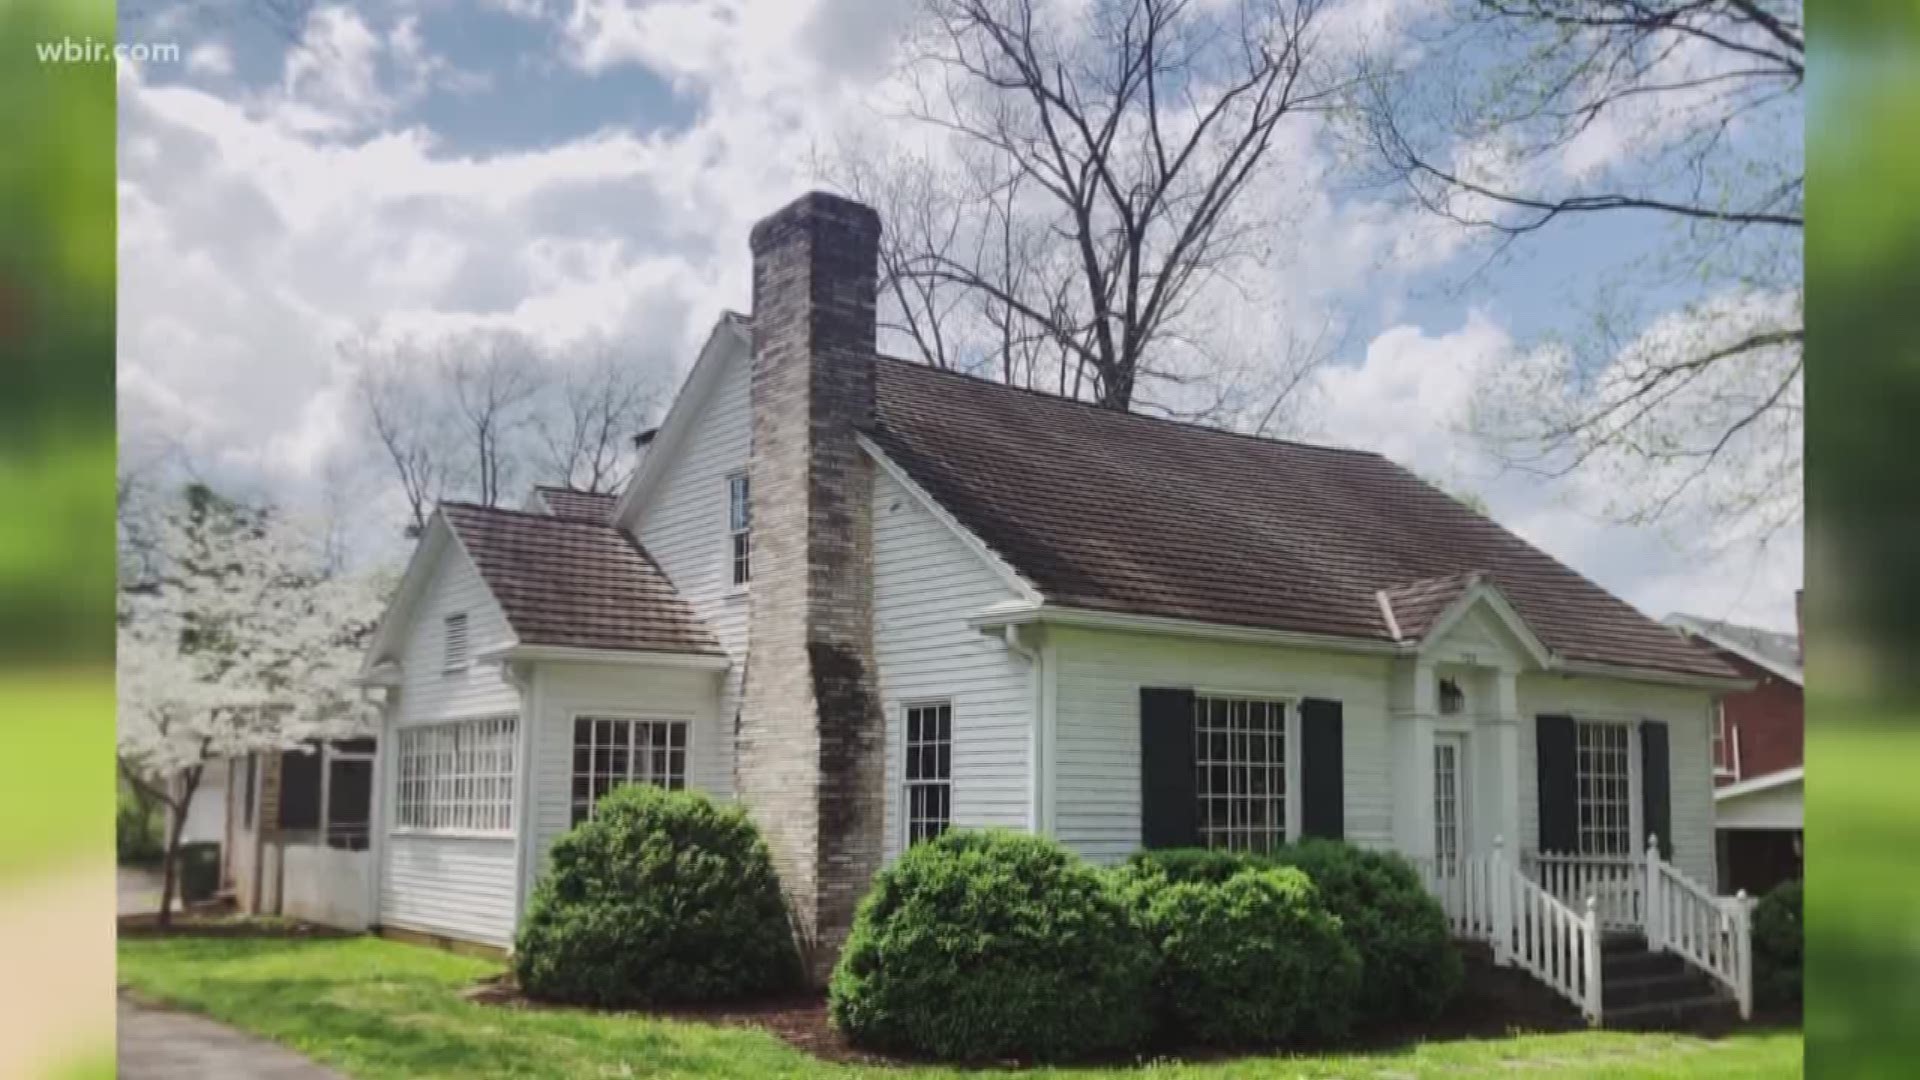 This Saturday, the College Hill Neighborhood in Maryville will host a historic homes tour. https://www.collegehillmaryville.com/home-tour/